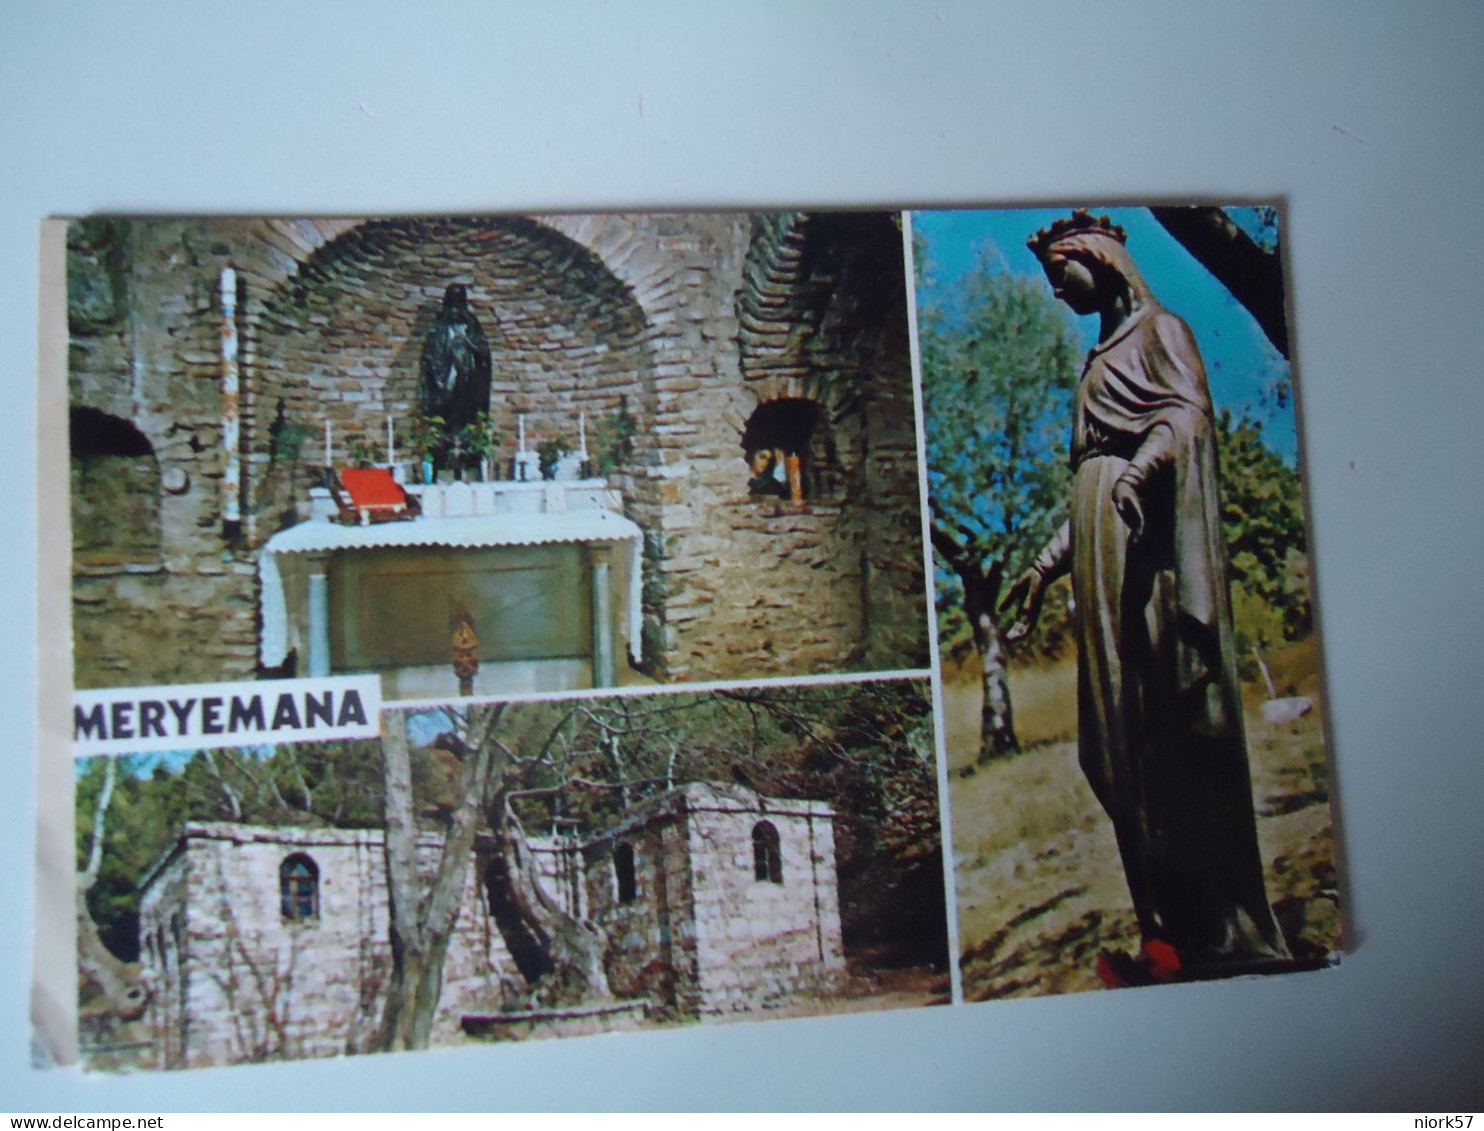 TURKEY   POSTCARDS  MONUMENTS MORE  PURHASES 10% - Turquia